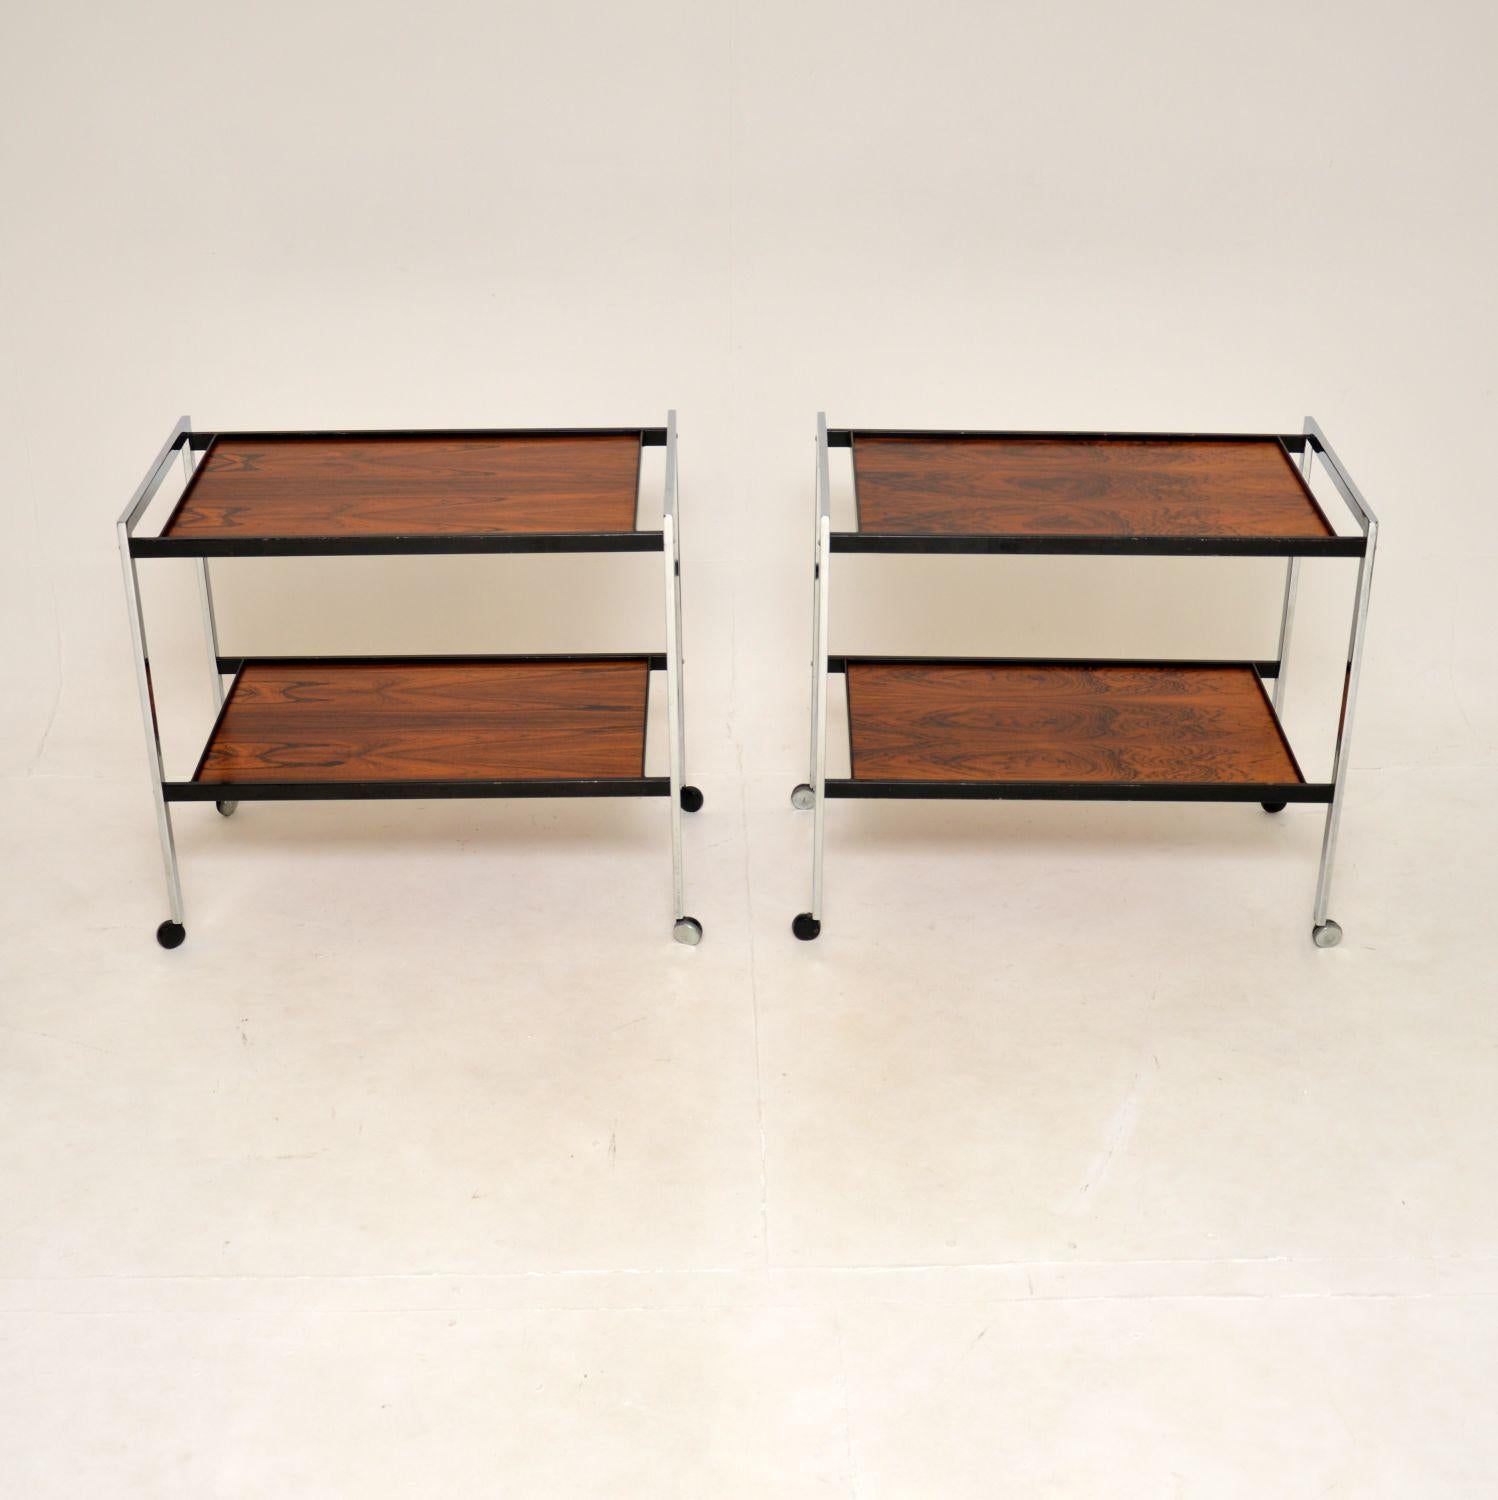 A stunning pair of vintage side tables / drinks trolleys. They were made in England, they date from the 1960’s.

The quality is superb, they are beautifully constructed from chromed steel, with ebonized steel supporting the wooden top and lower